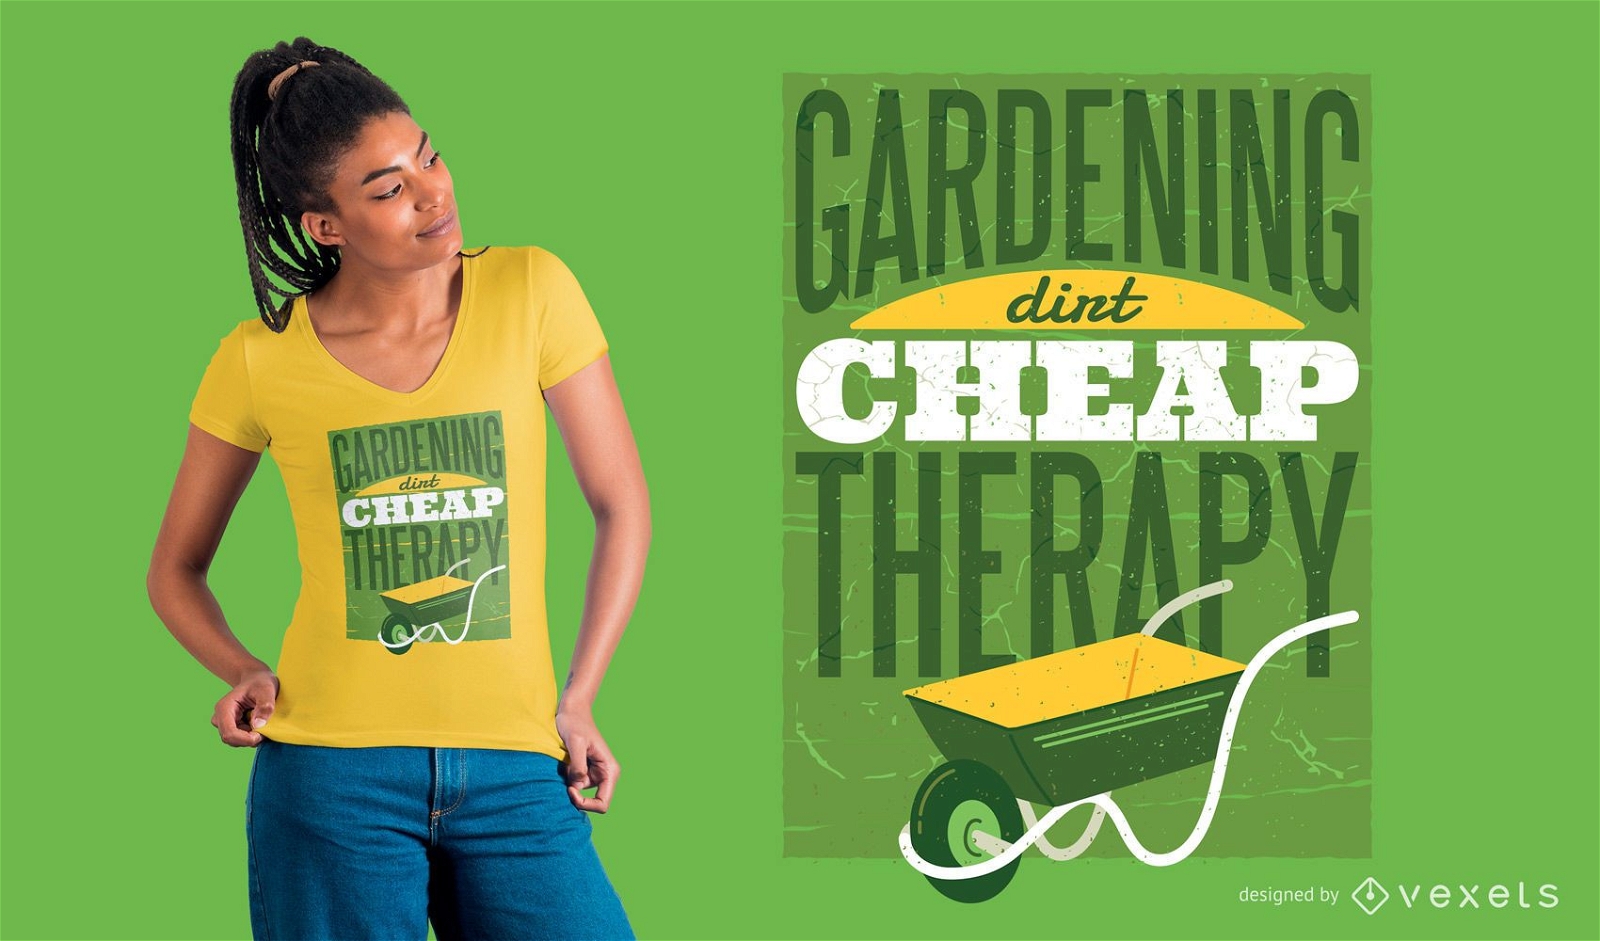 Gardening Therapy T-shirt Design